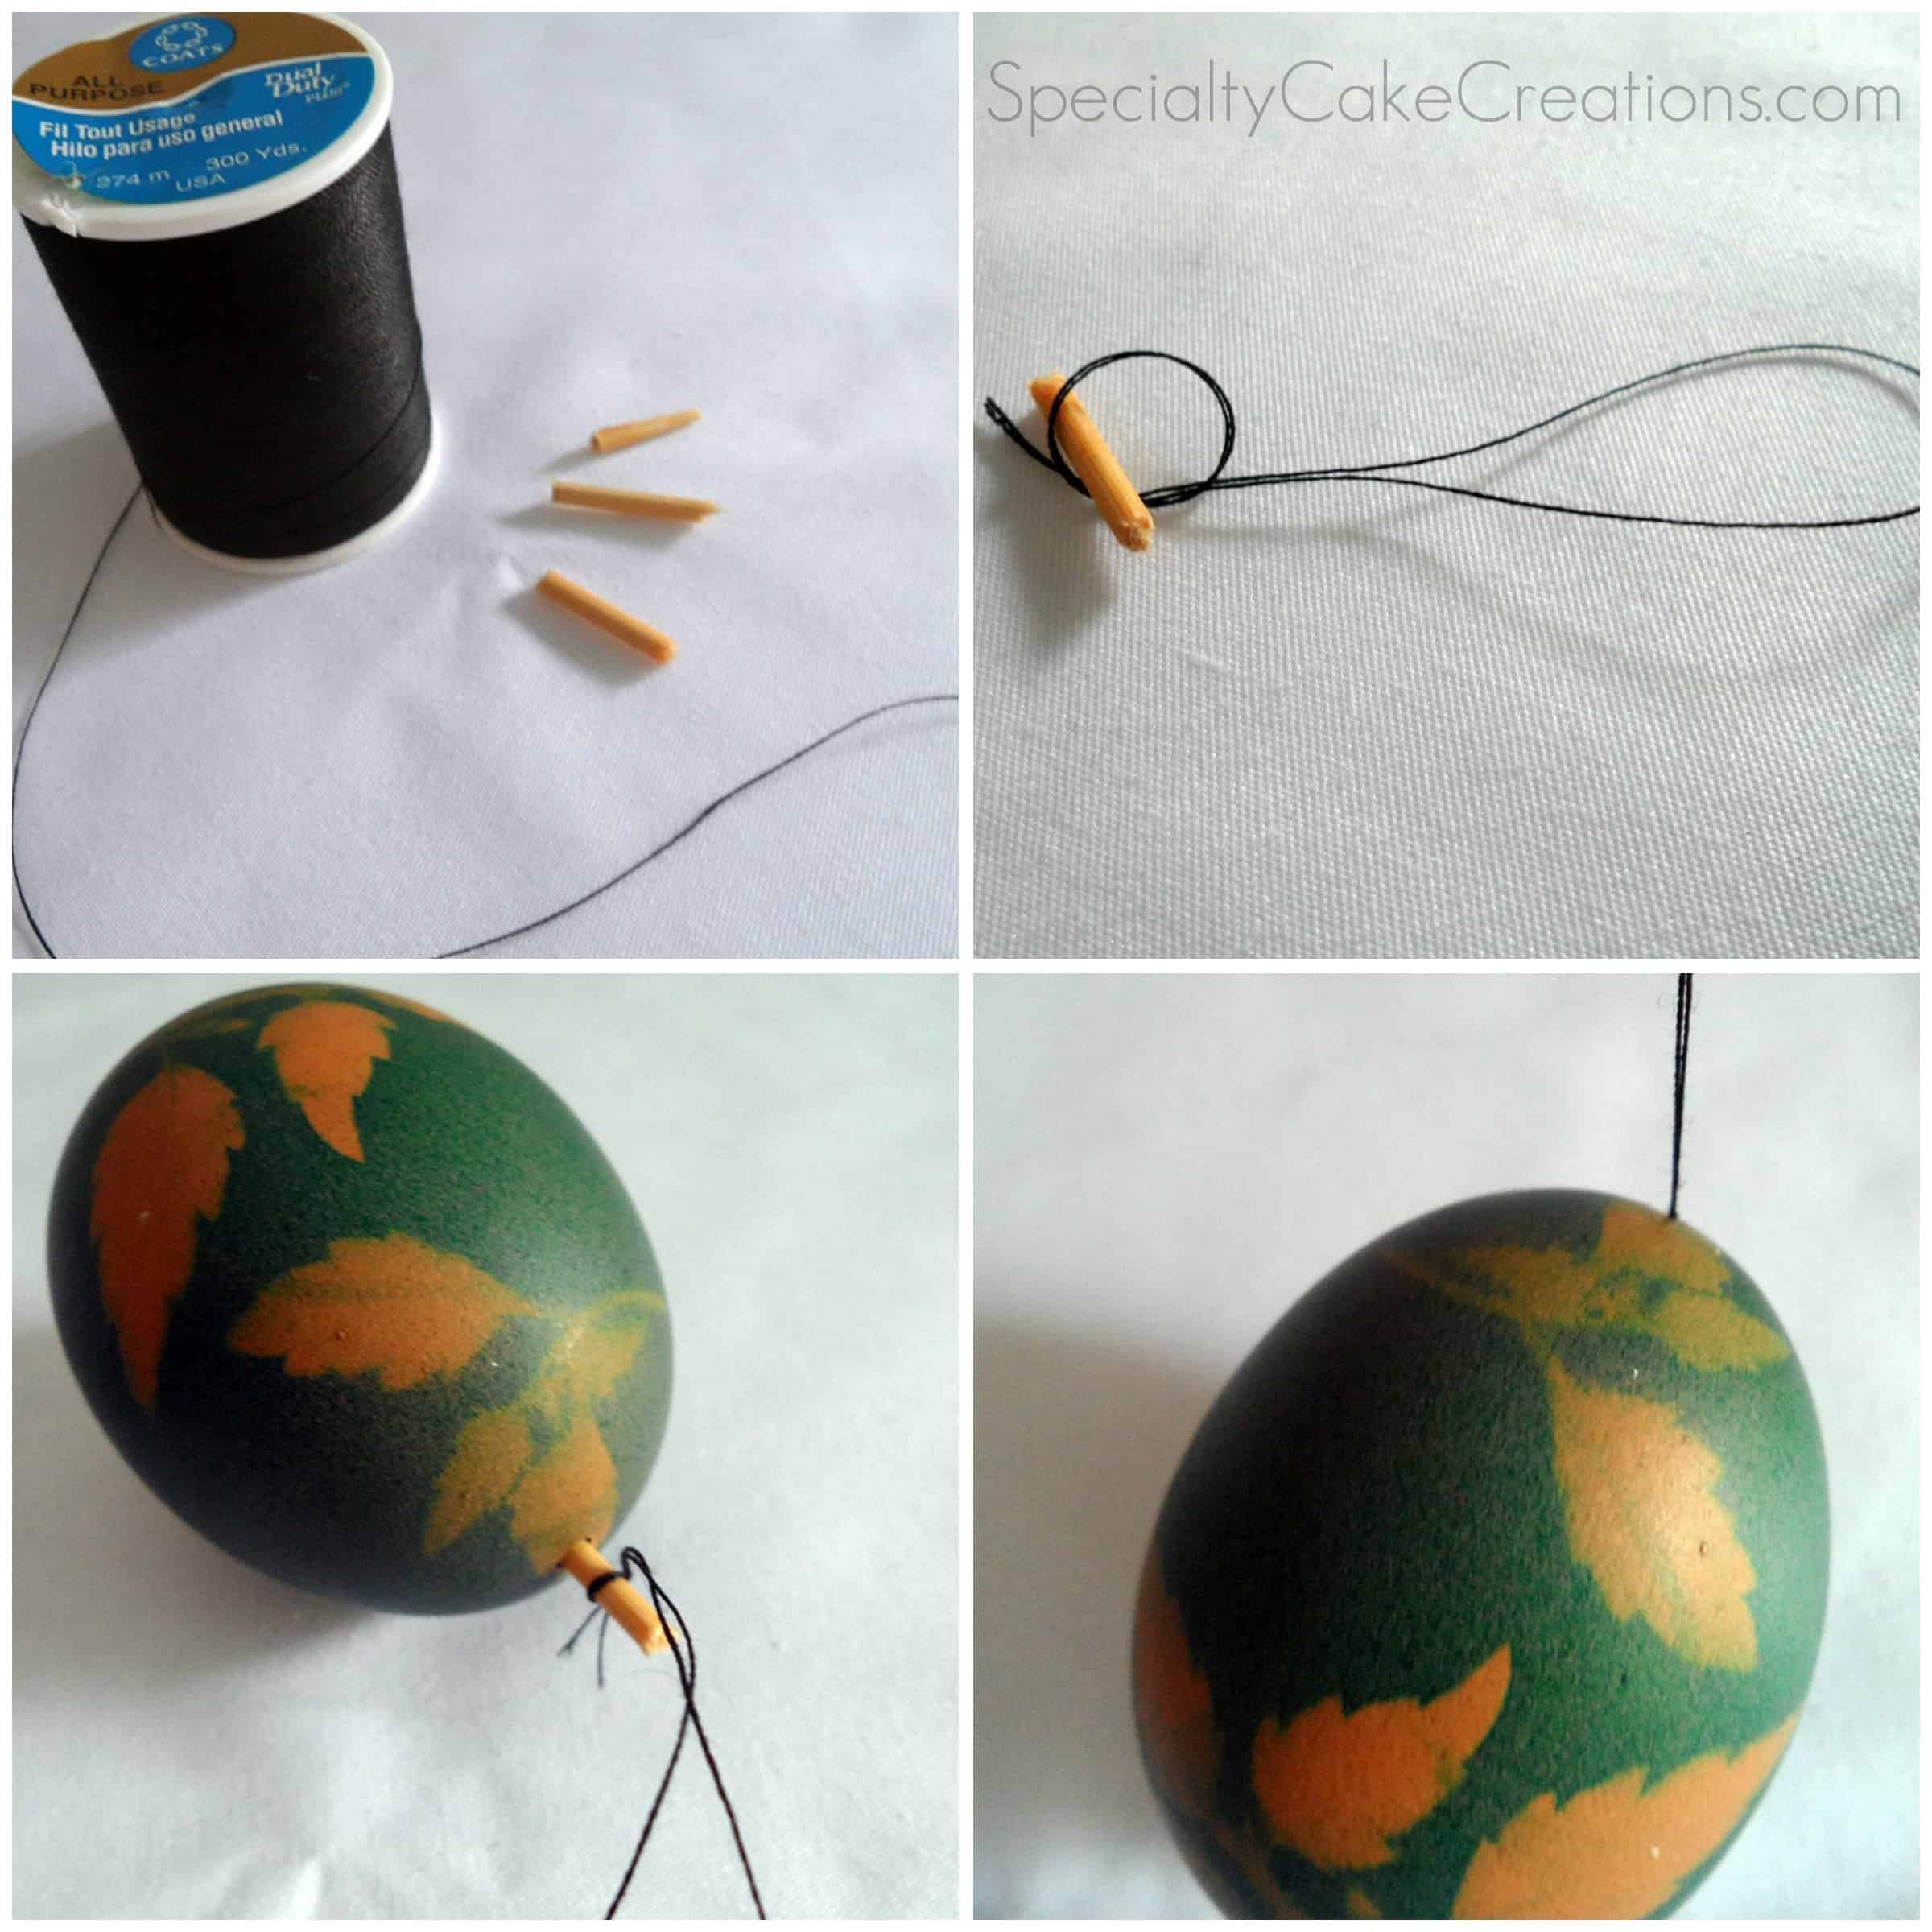 Stenciling Eggs with Leaves